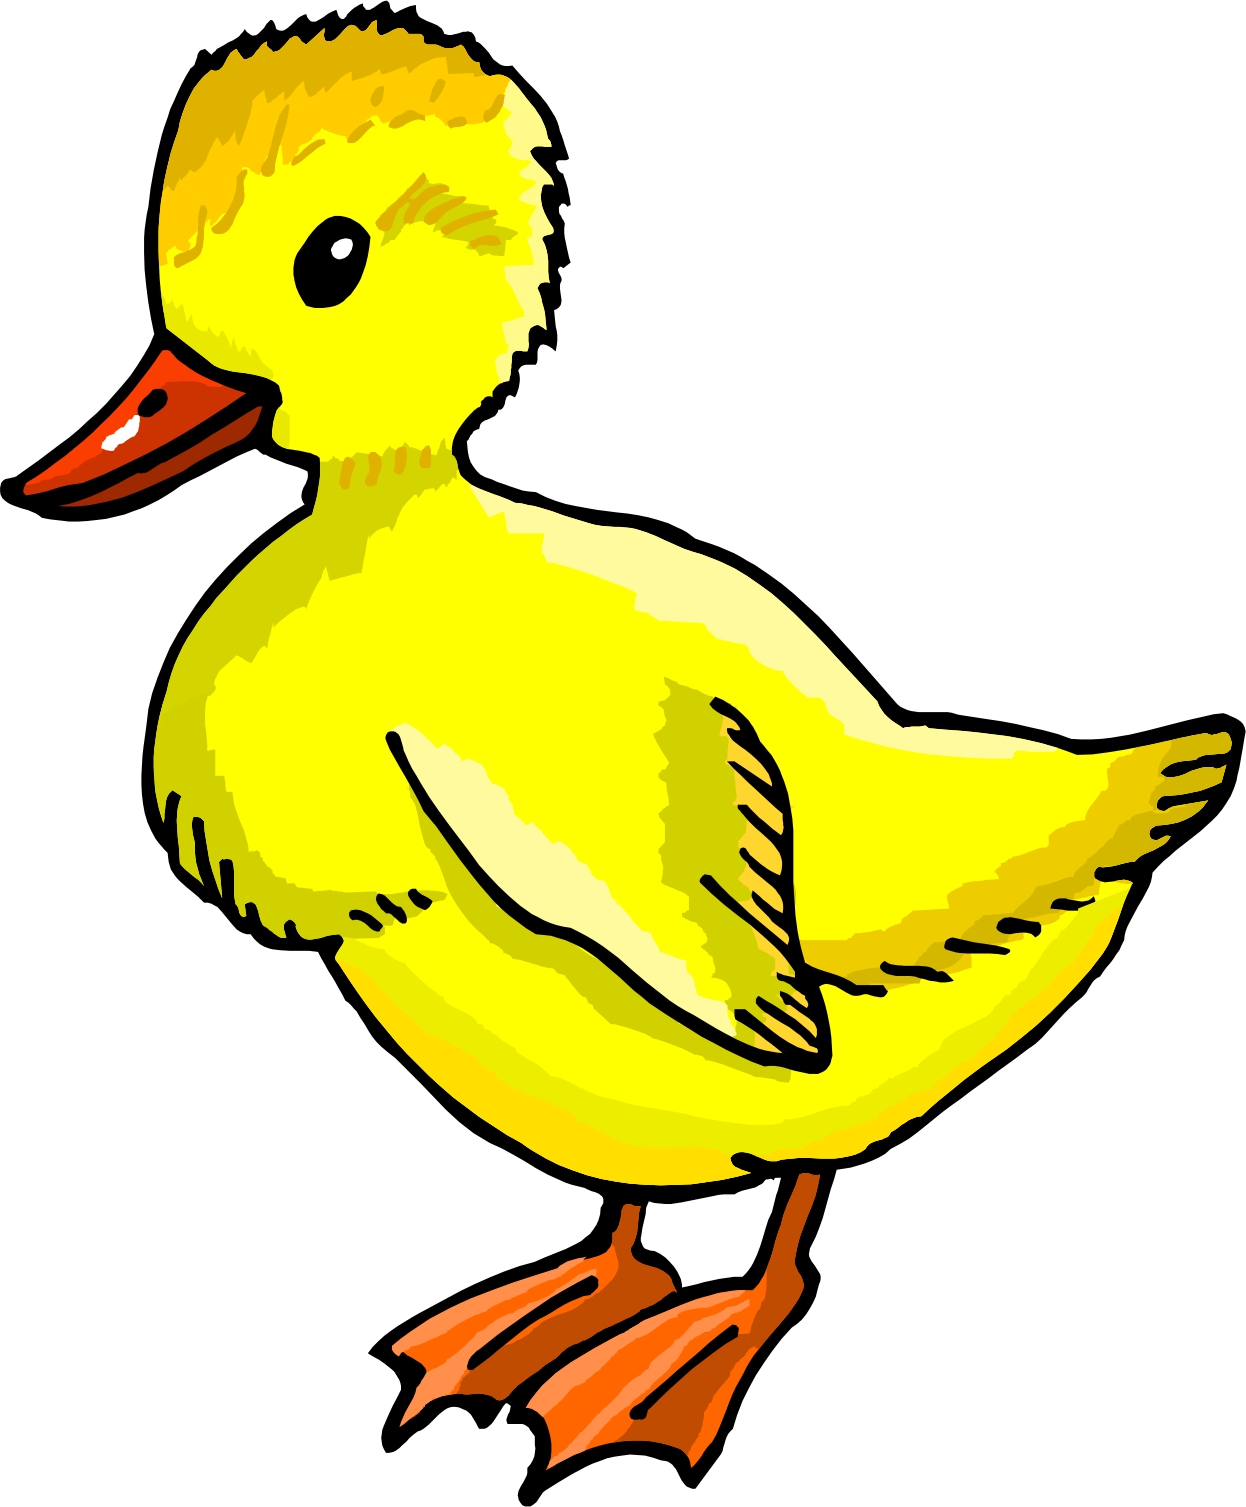 Duck and ducklings panda. Duckling clipart